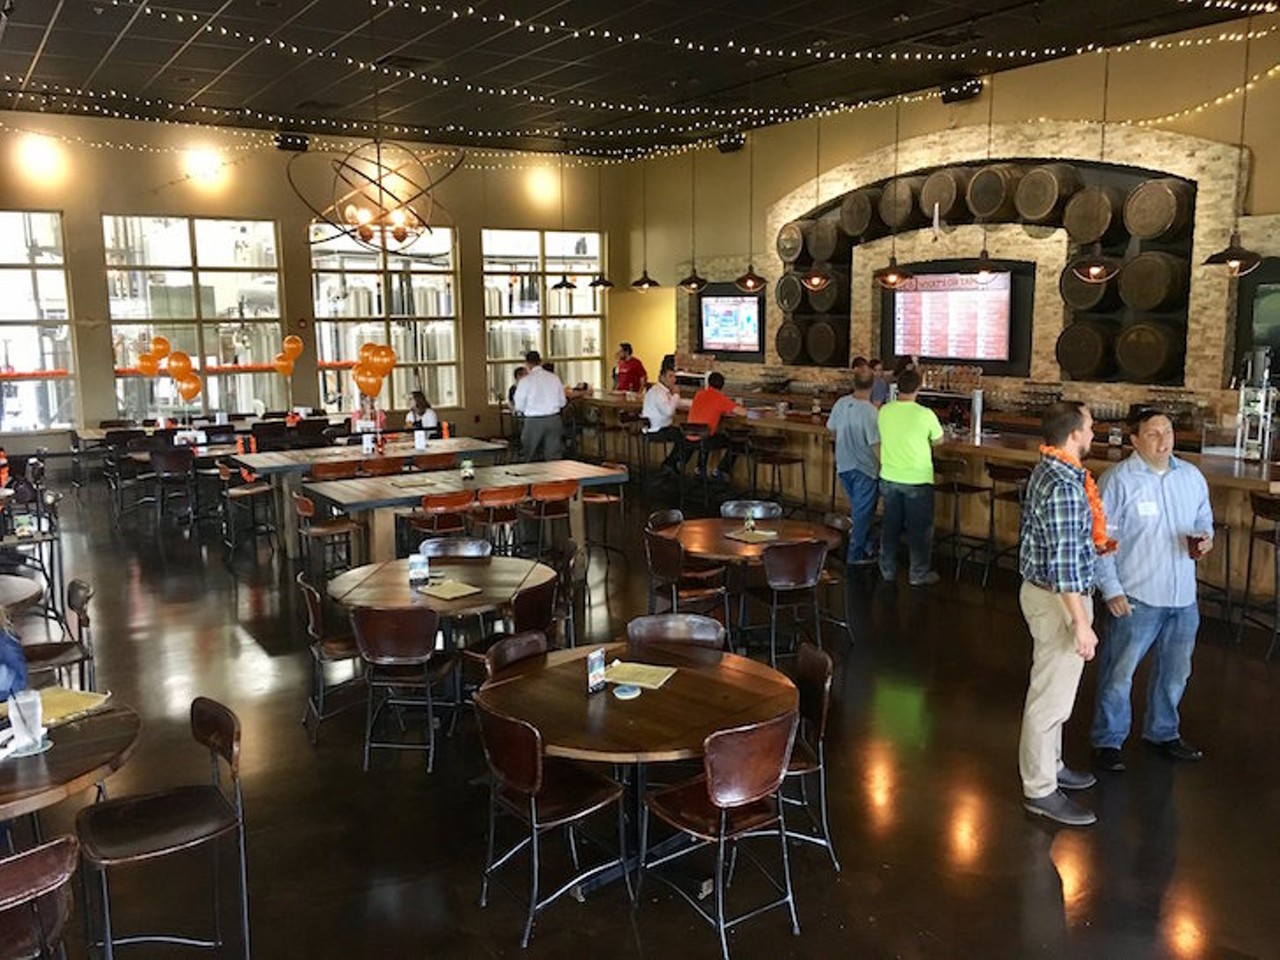 Brew Hub  
4100 Frontage Rd. S. Lakeland, 863-698-7600
Tatonka Stout, Bodi Blonde, Golden Nugget IPA and Tejas Negras are just a few brews offered at this Lakeland spot. 
Photo via Brew Hub/Facebook